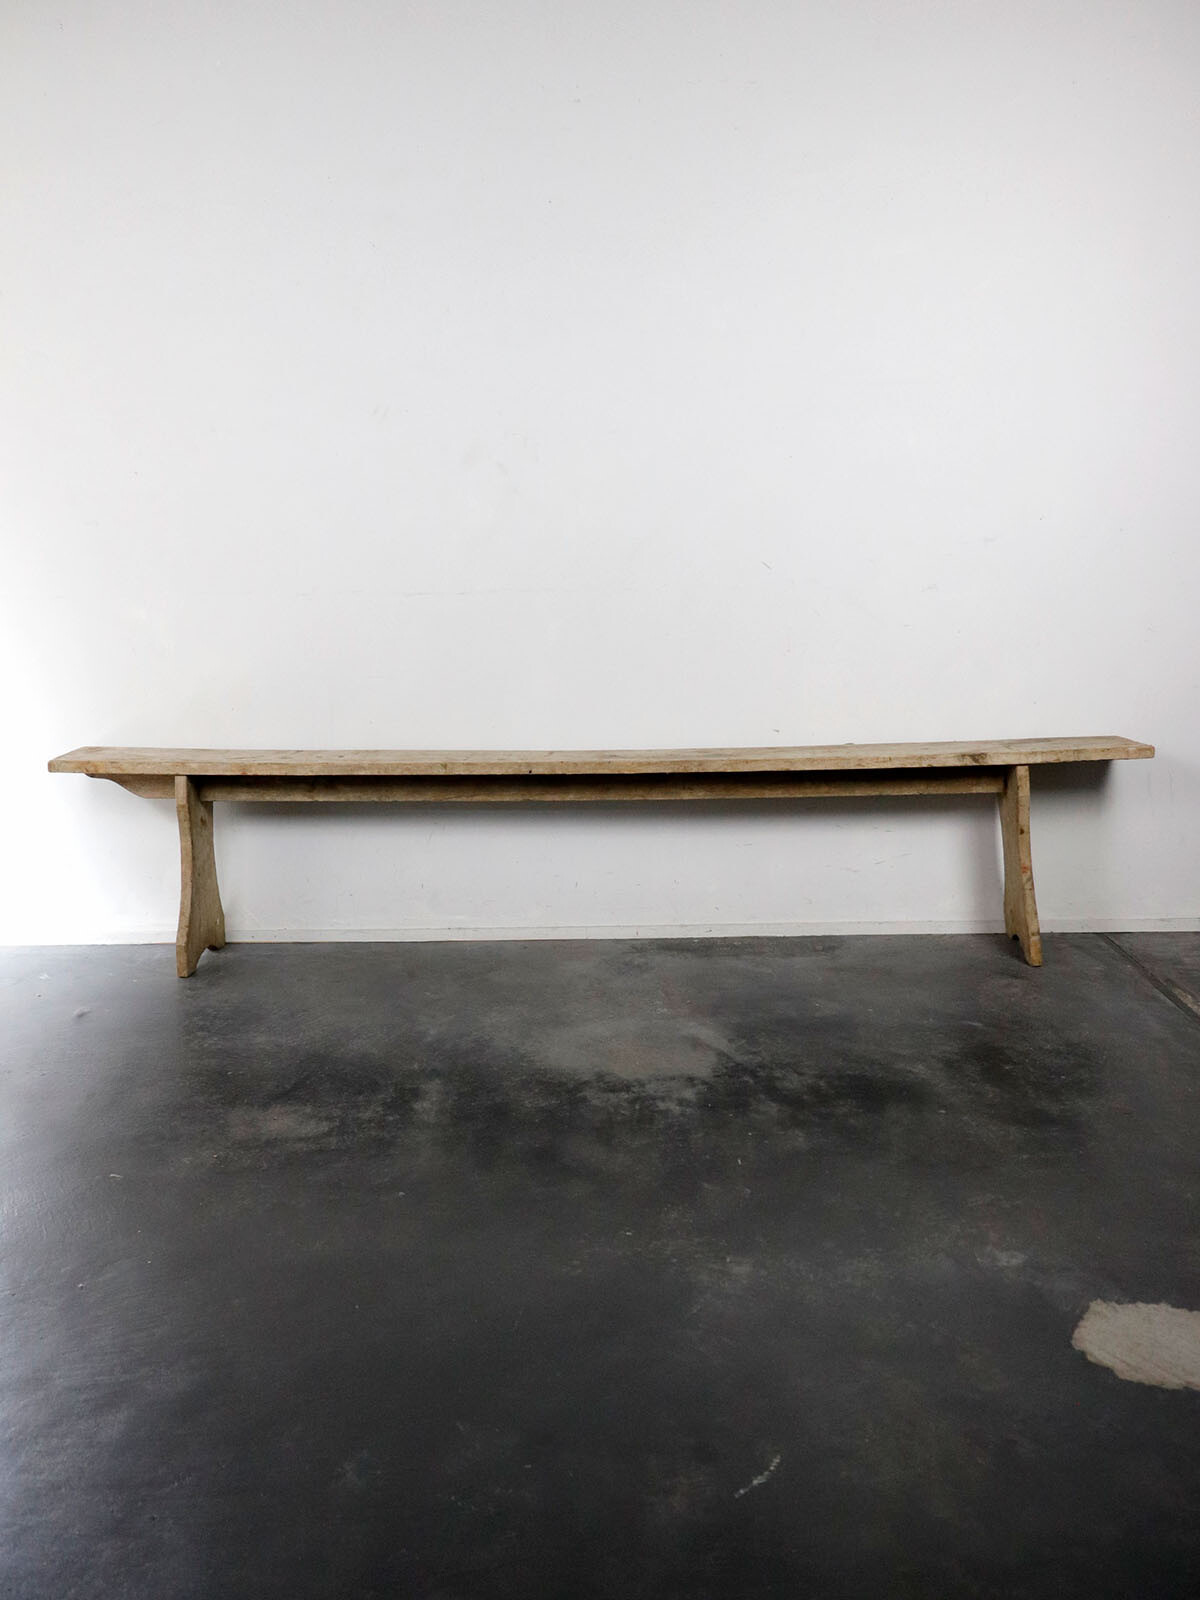 1900's,pine wood,long bench,france